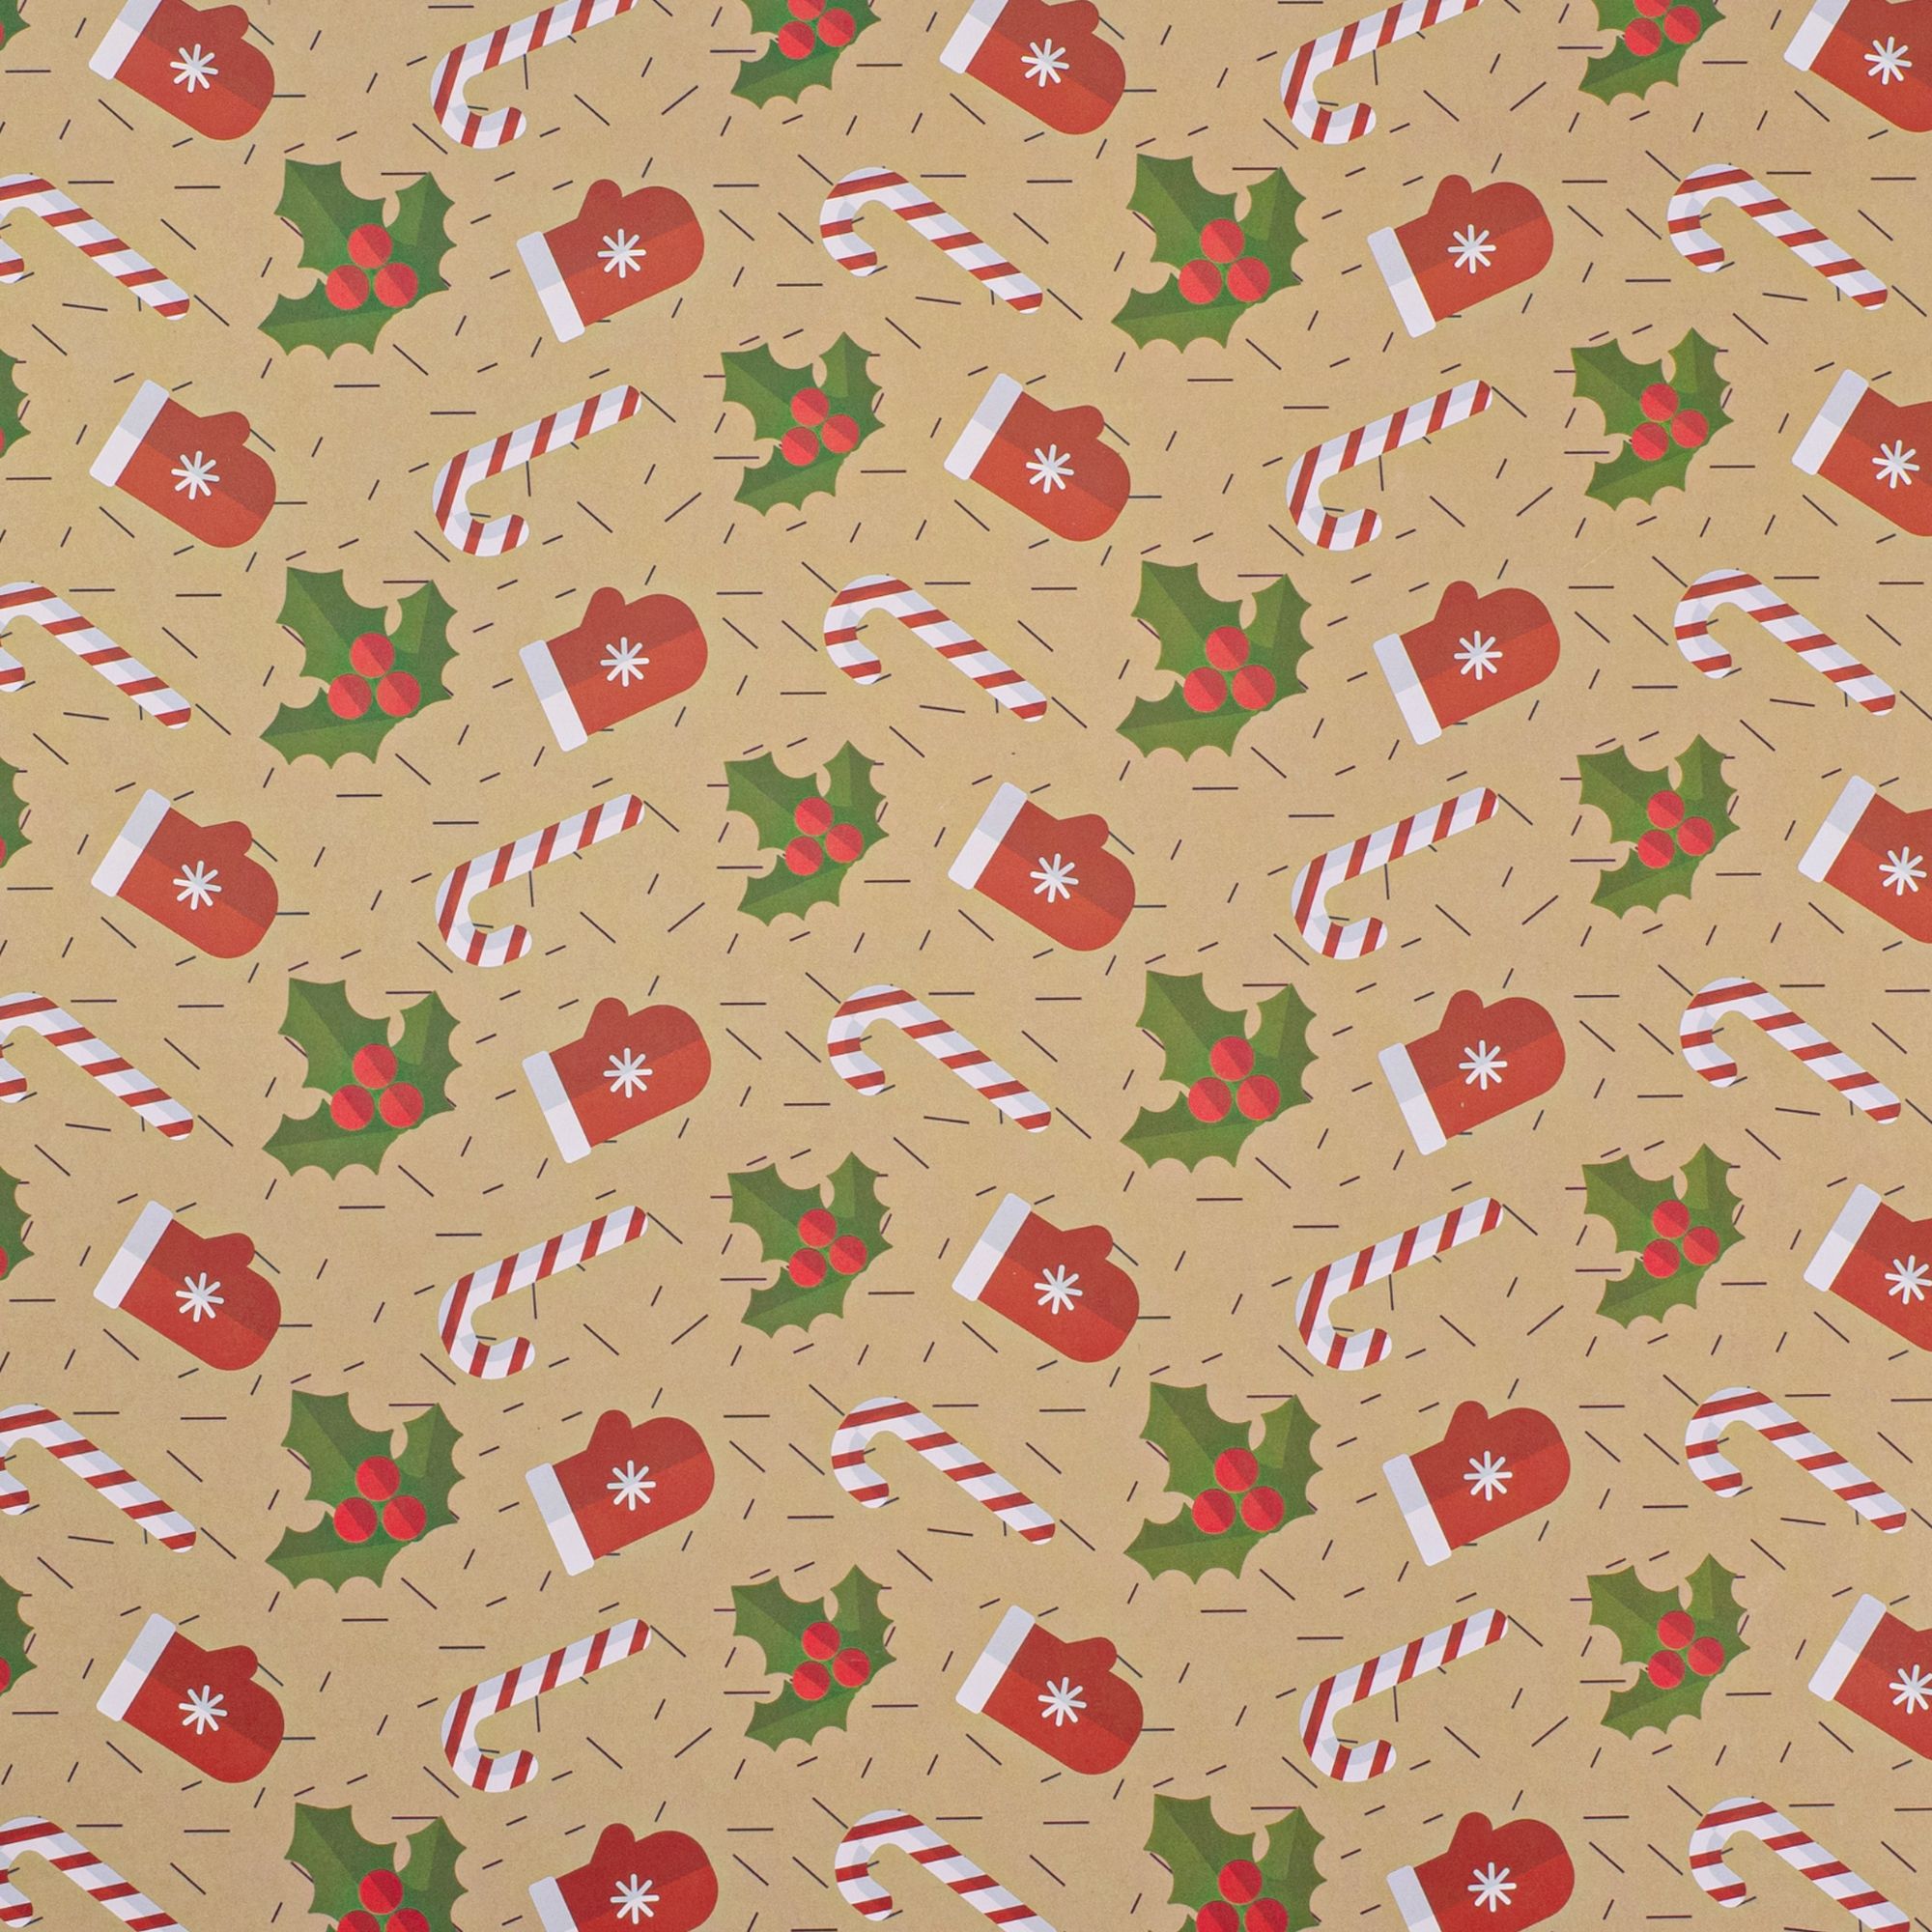 Wrapping Paper - Christmas Gift